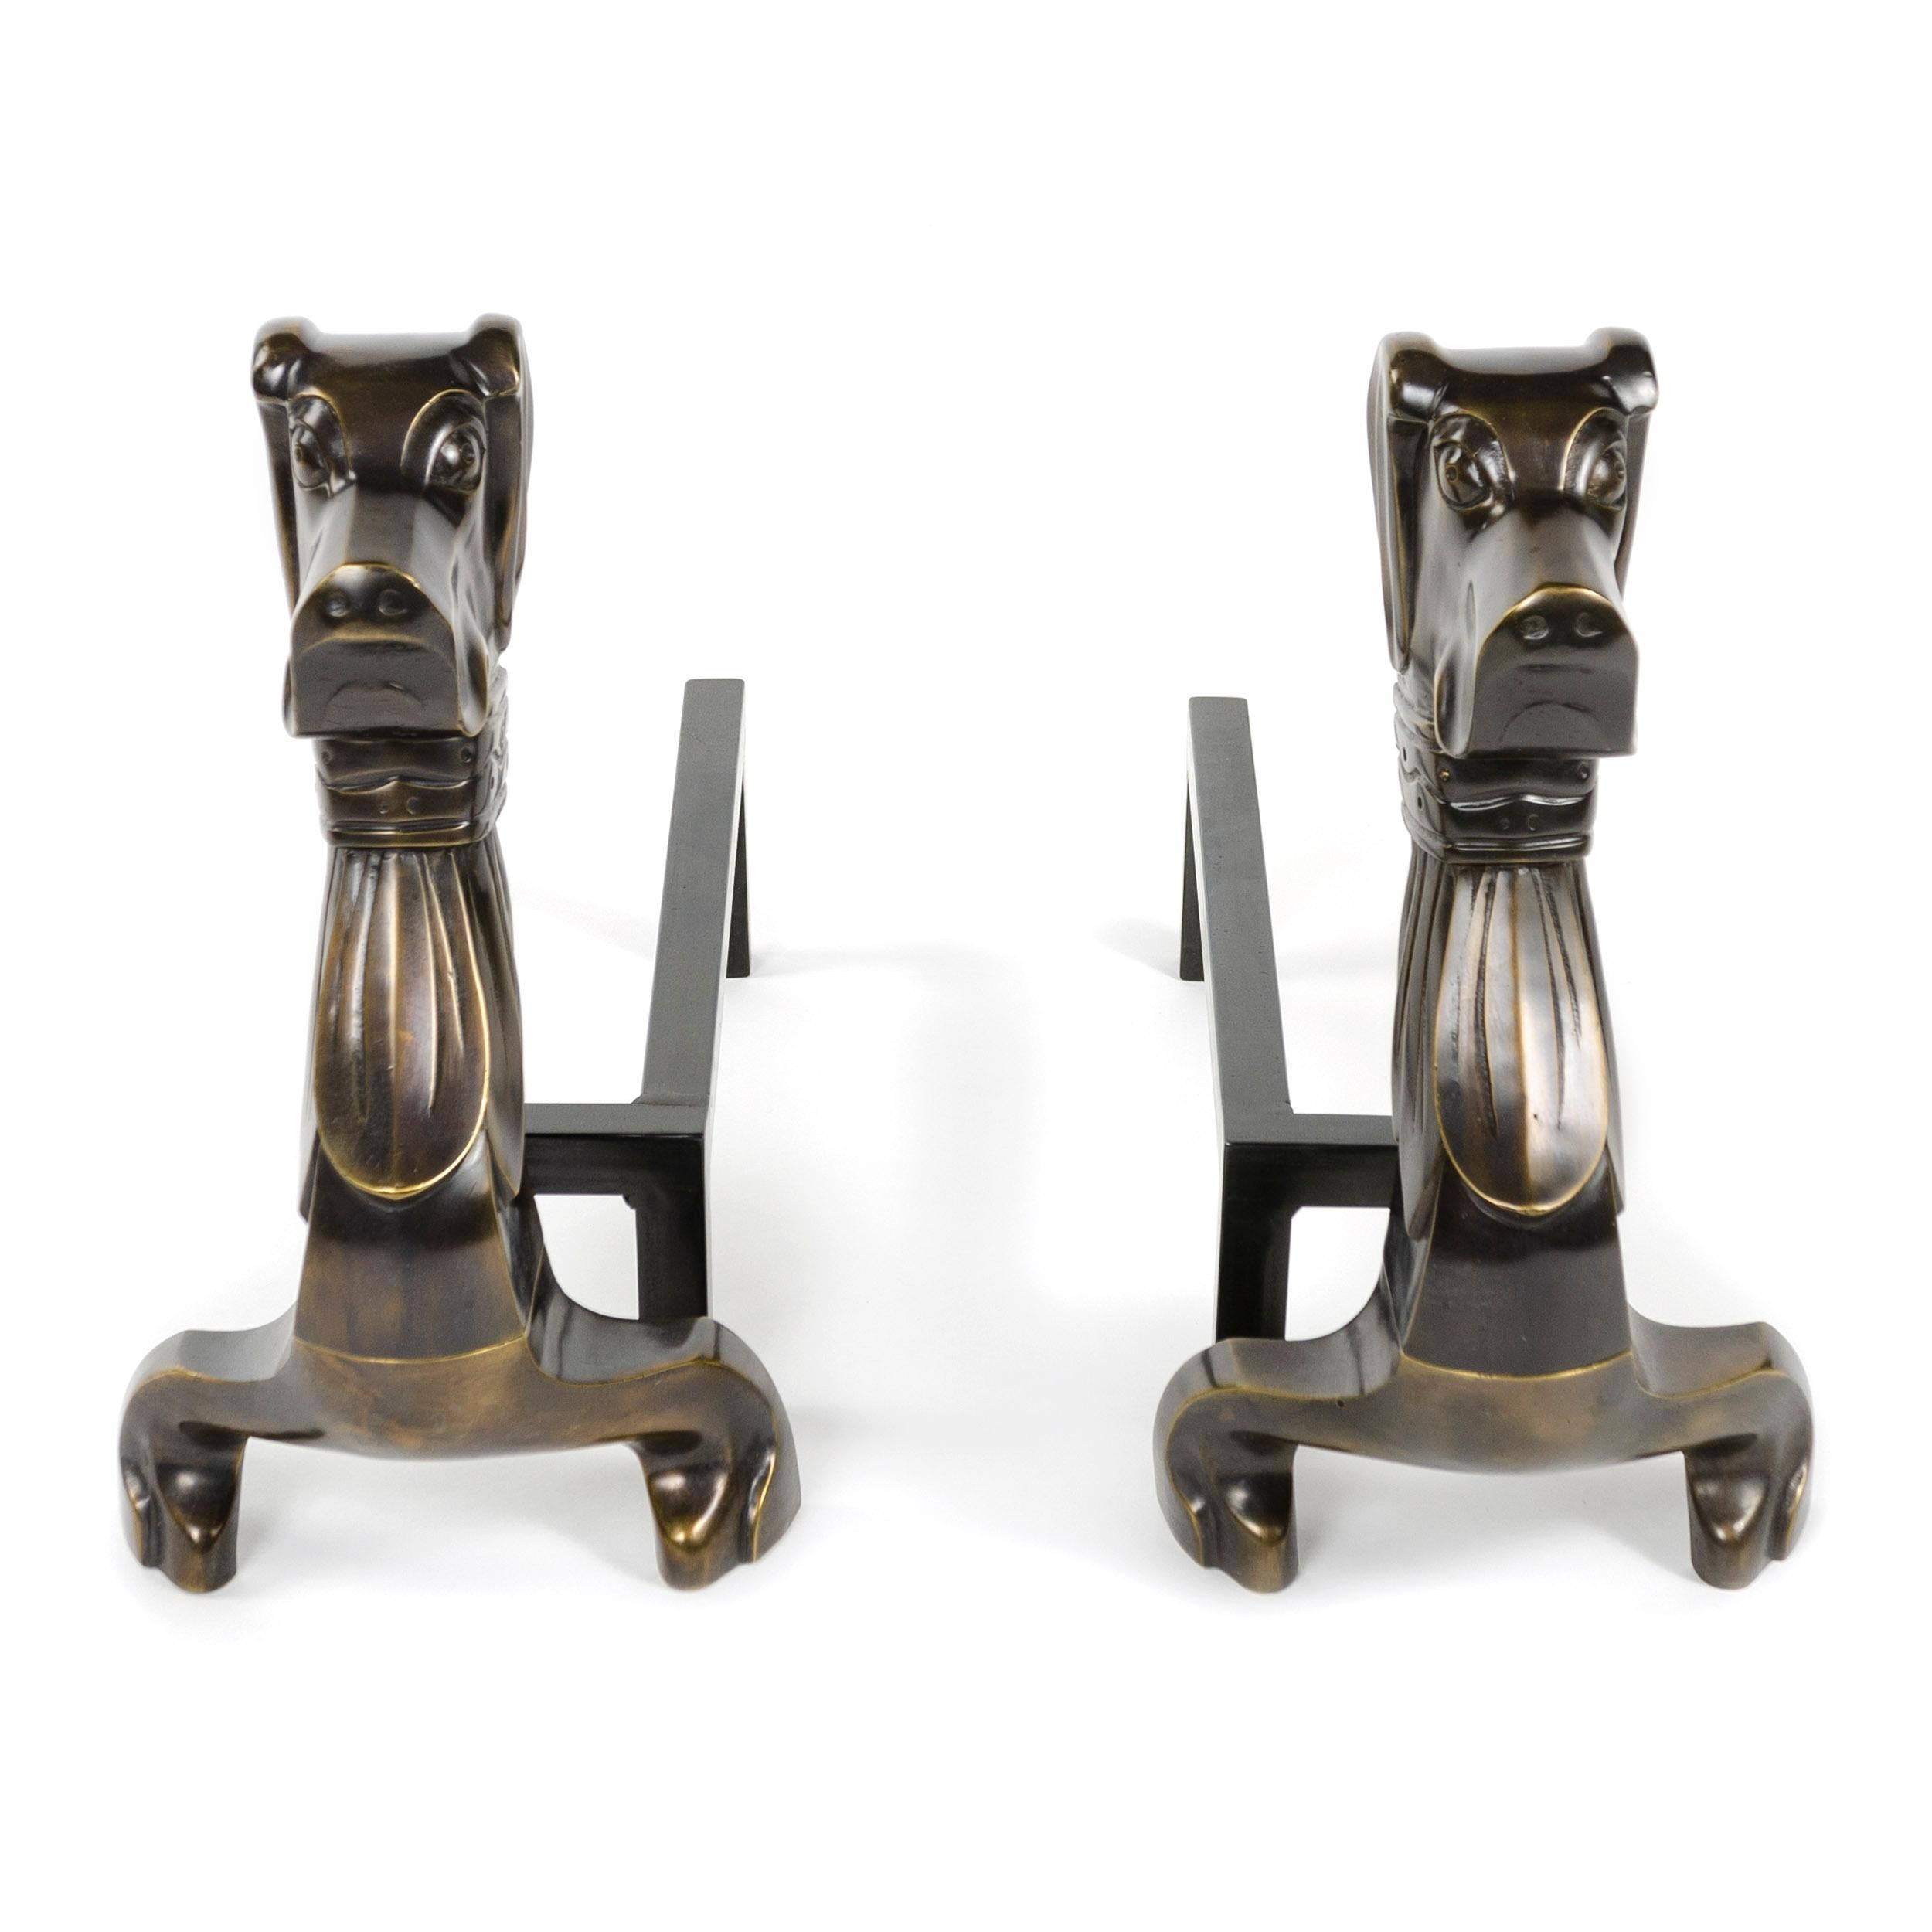 A substantial pair of Art Deco dachshund andirons in a patinated bronze finish.